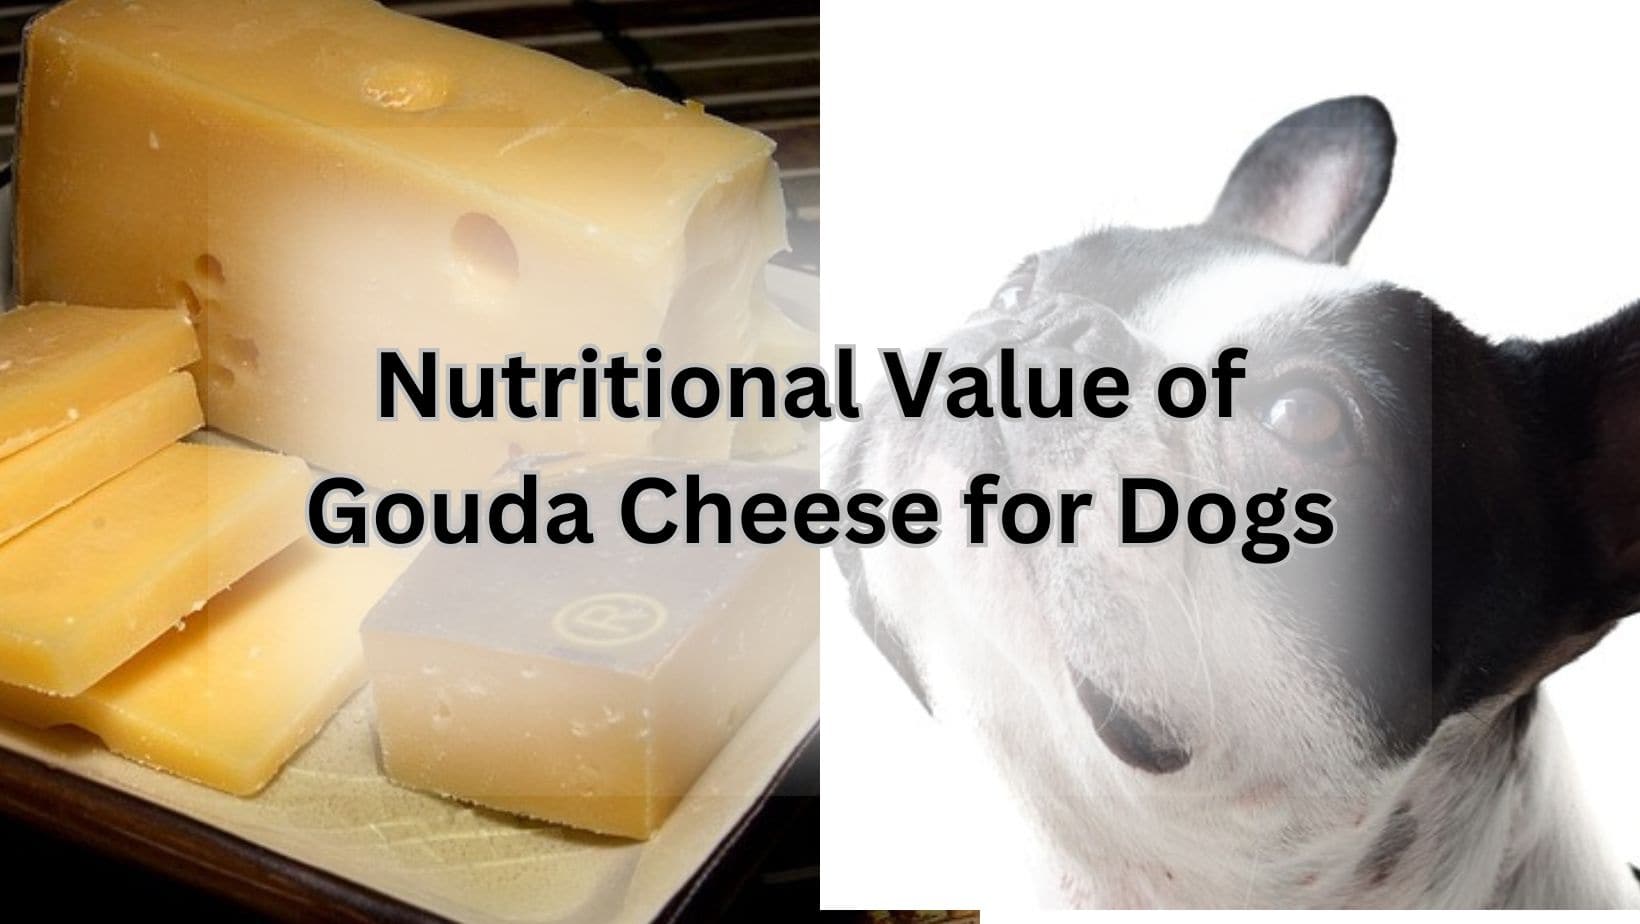 Nutritional Value of Gouda Cheese for Dogs